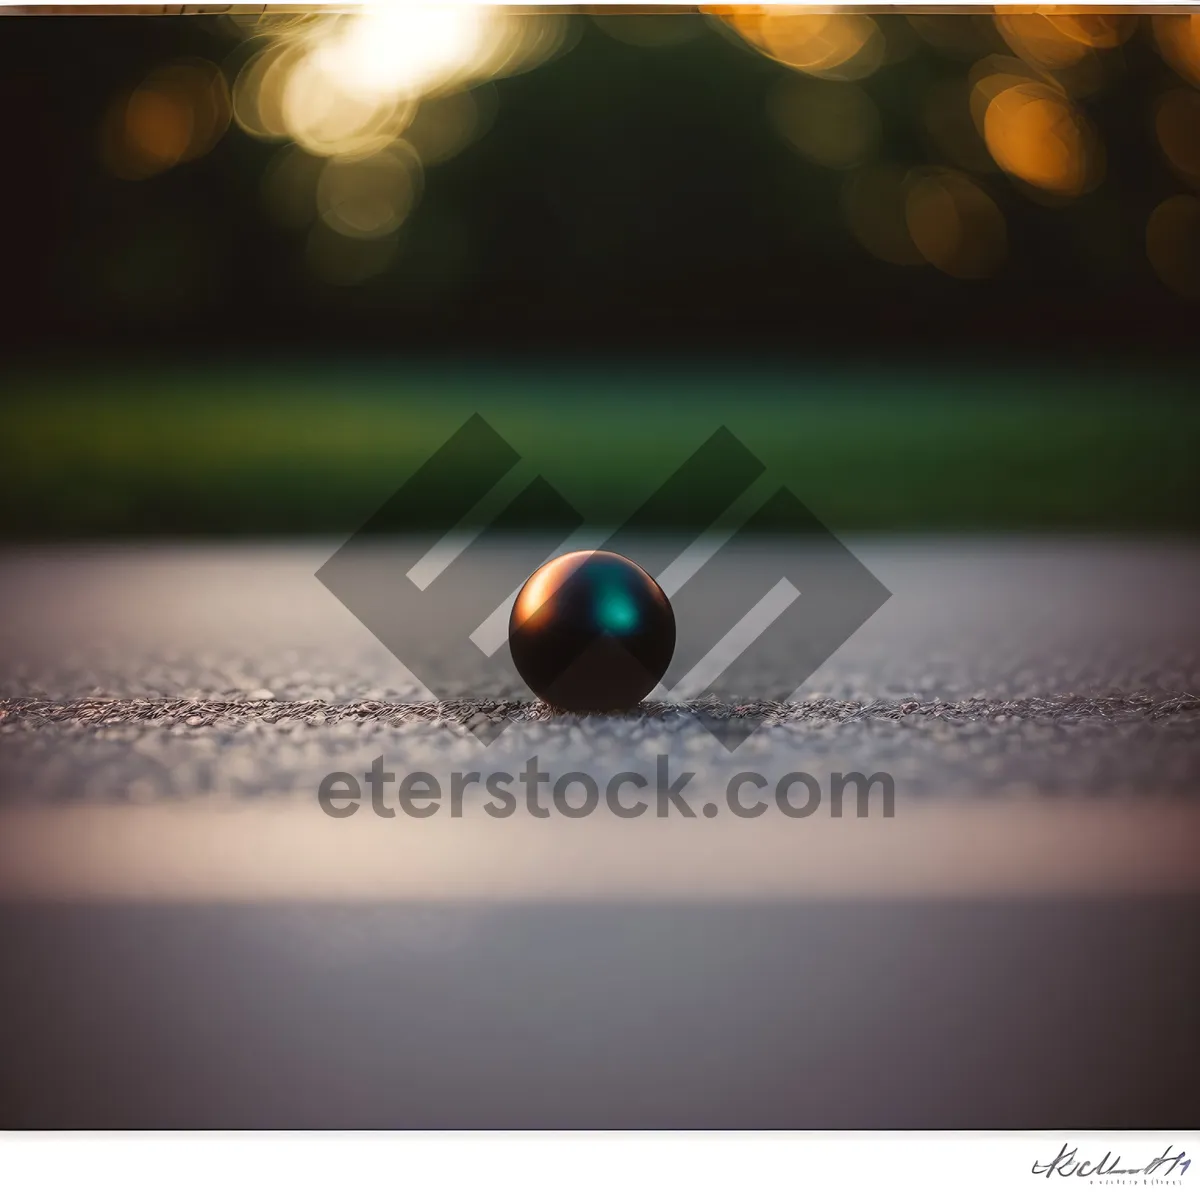 Picture of Olive Ladybug: Shimmering Sphere Beetle on Ball